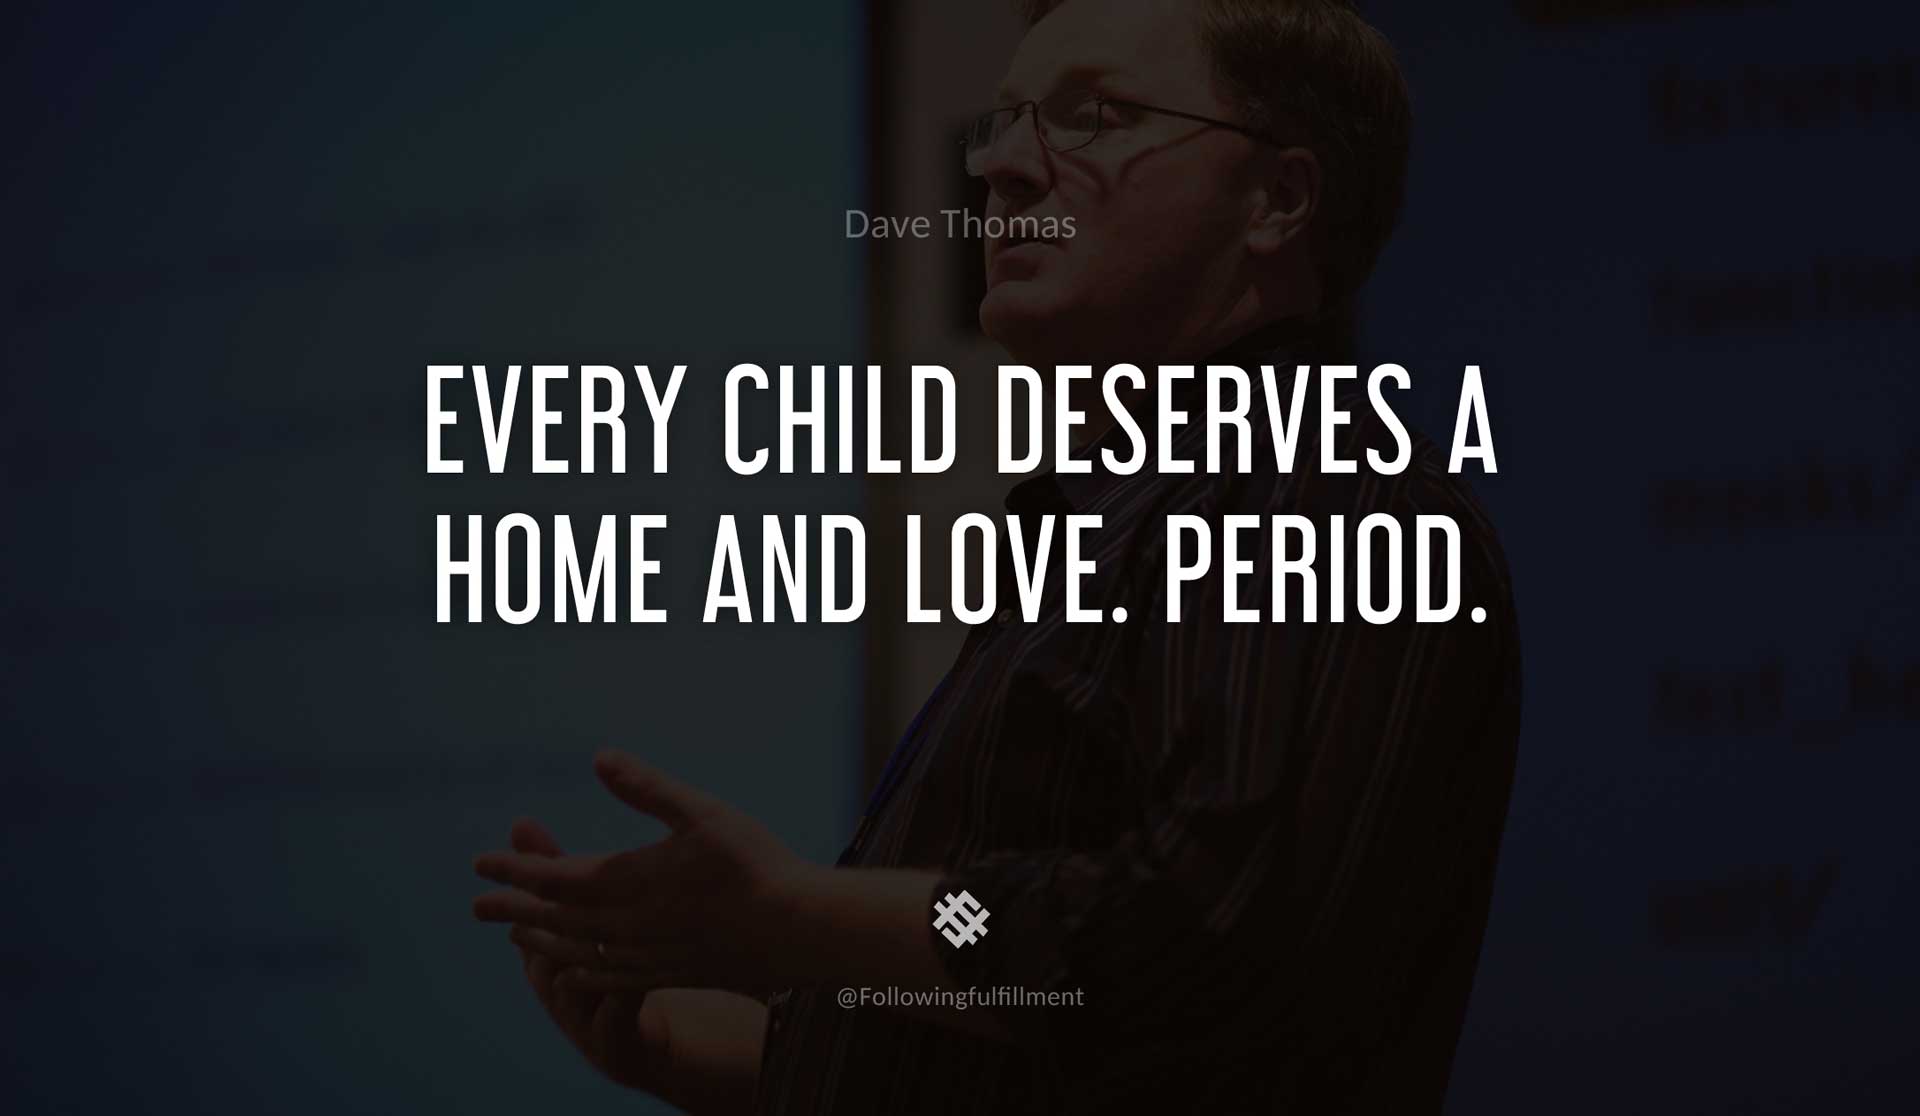 Every-child-deserves-a-home-and-love.-Period.-DAVE-THOMAS-Quote.jpg